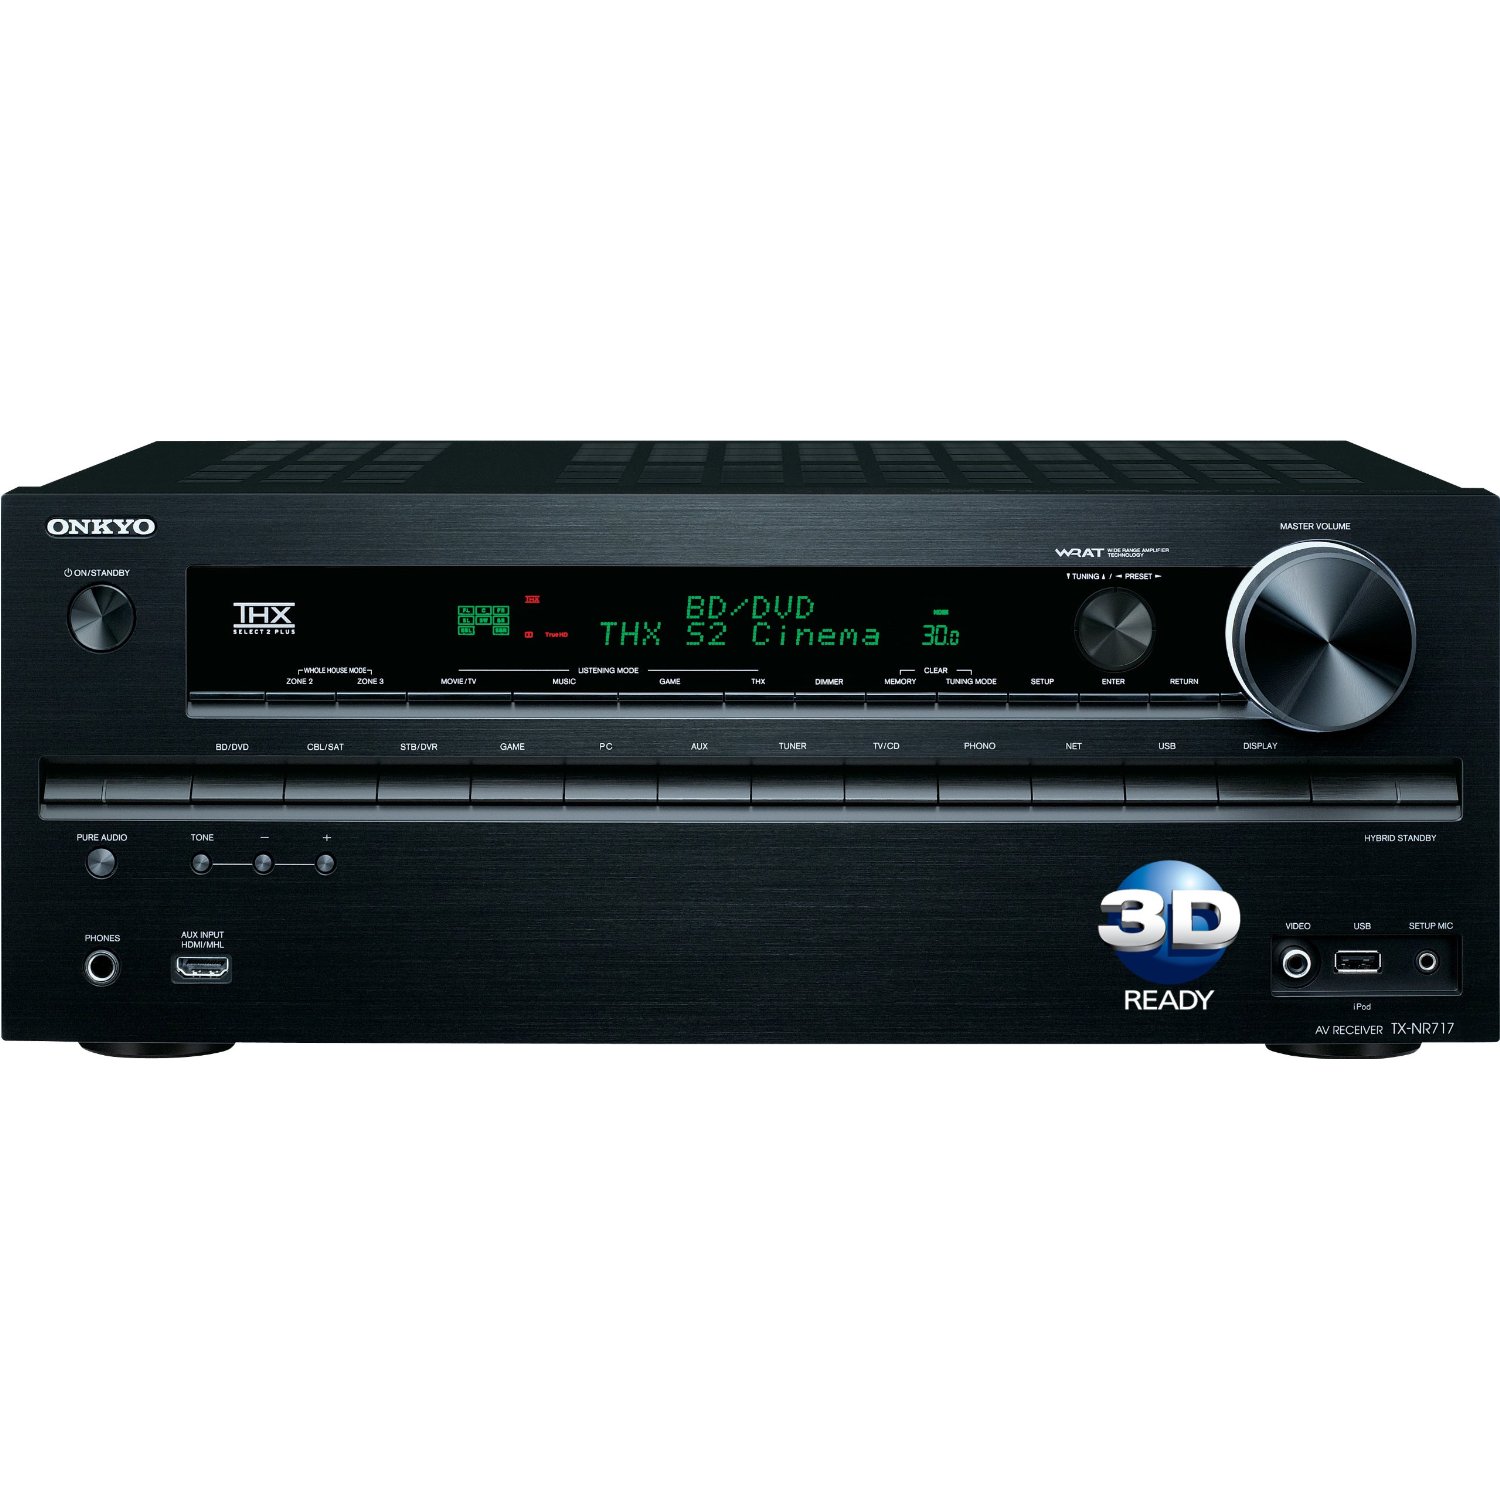 Onkyo TX-NR717 7.2-Channel Home Theater A/V Receiver (Black)  $489.99